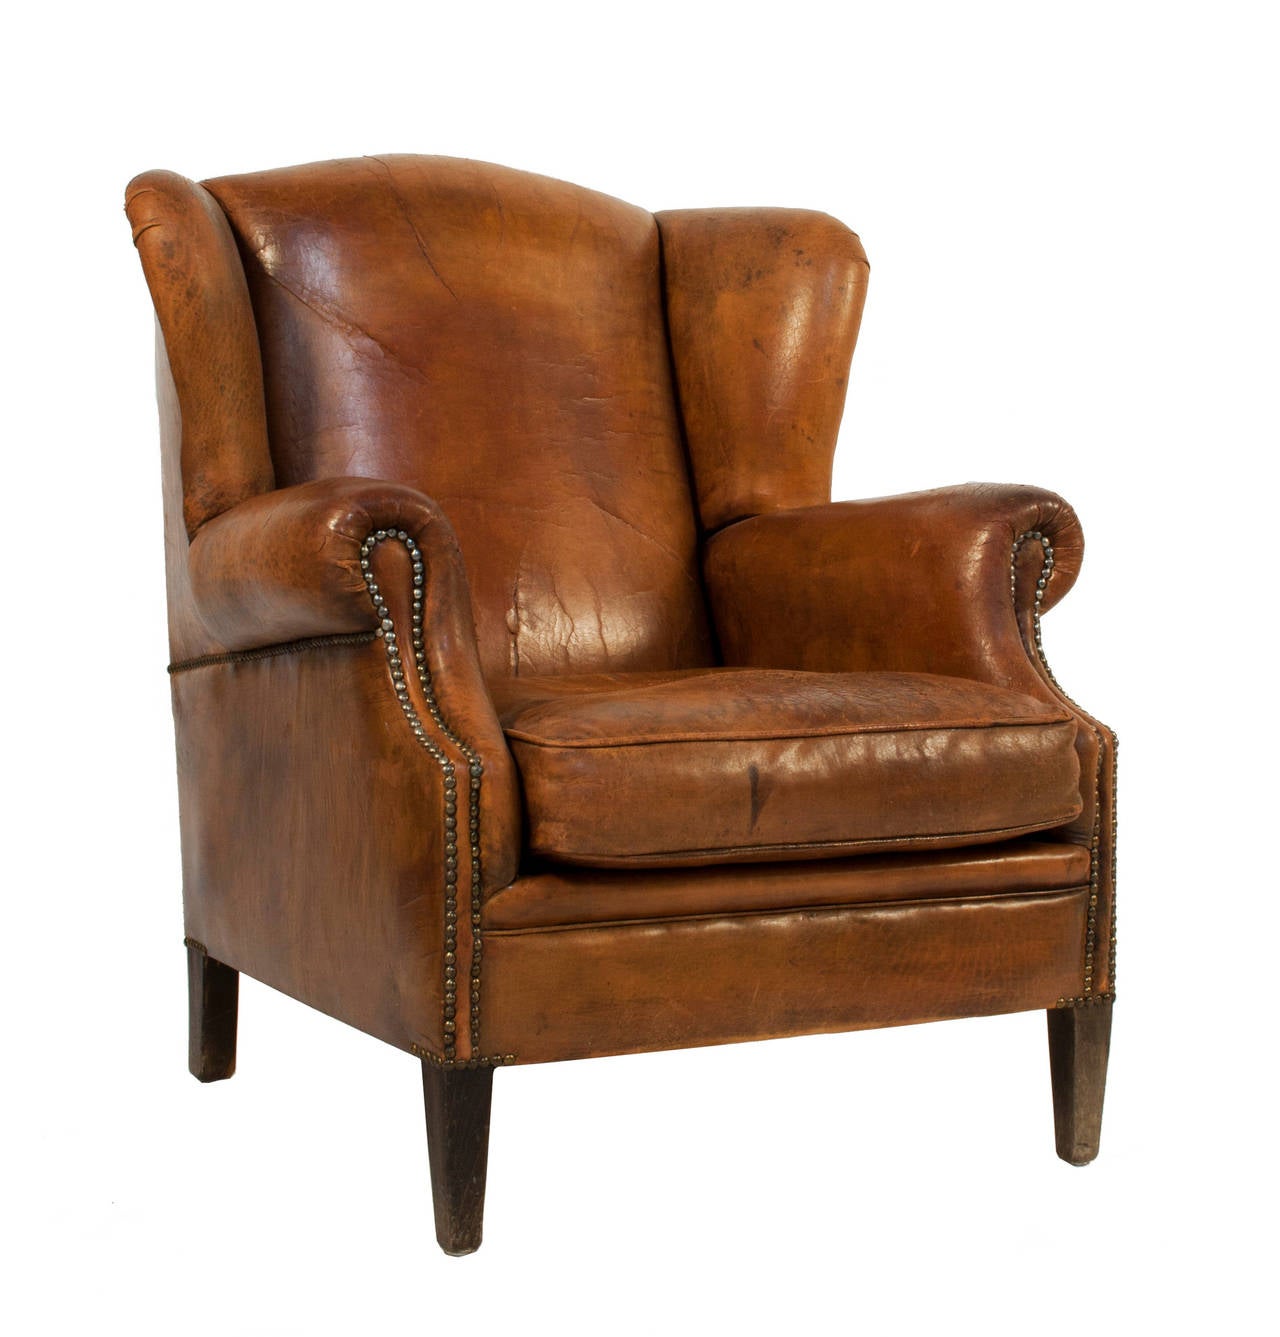 Leather wingback chair.